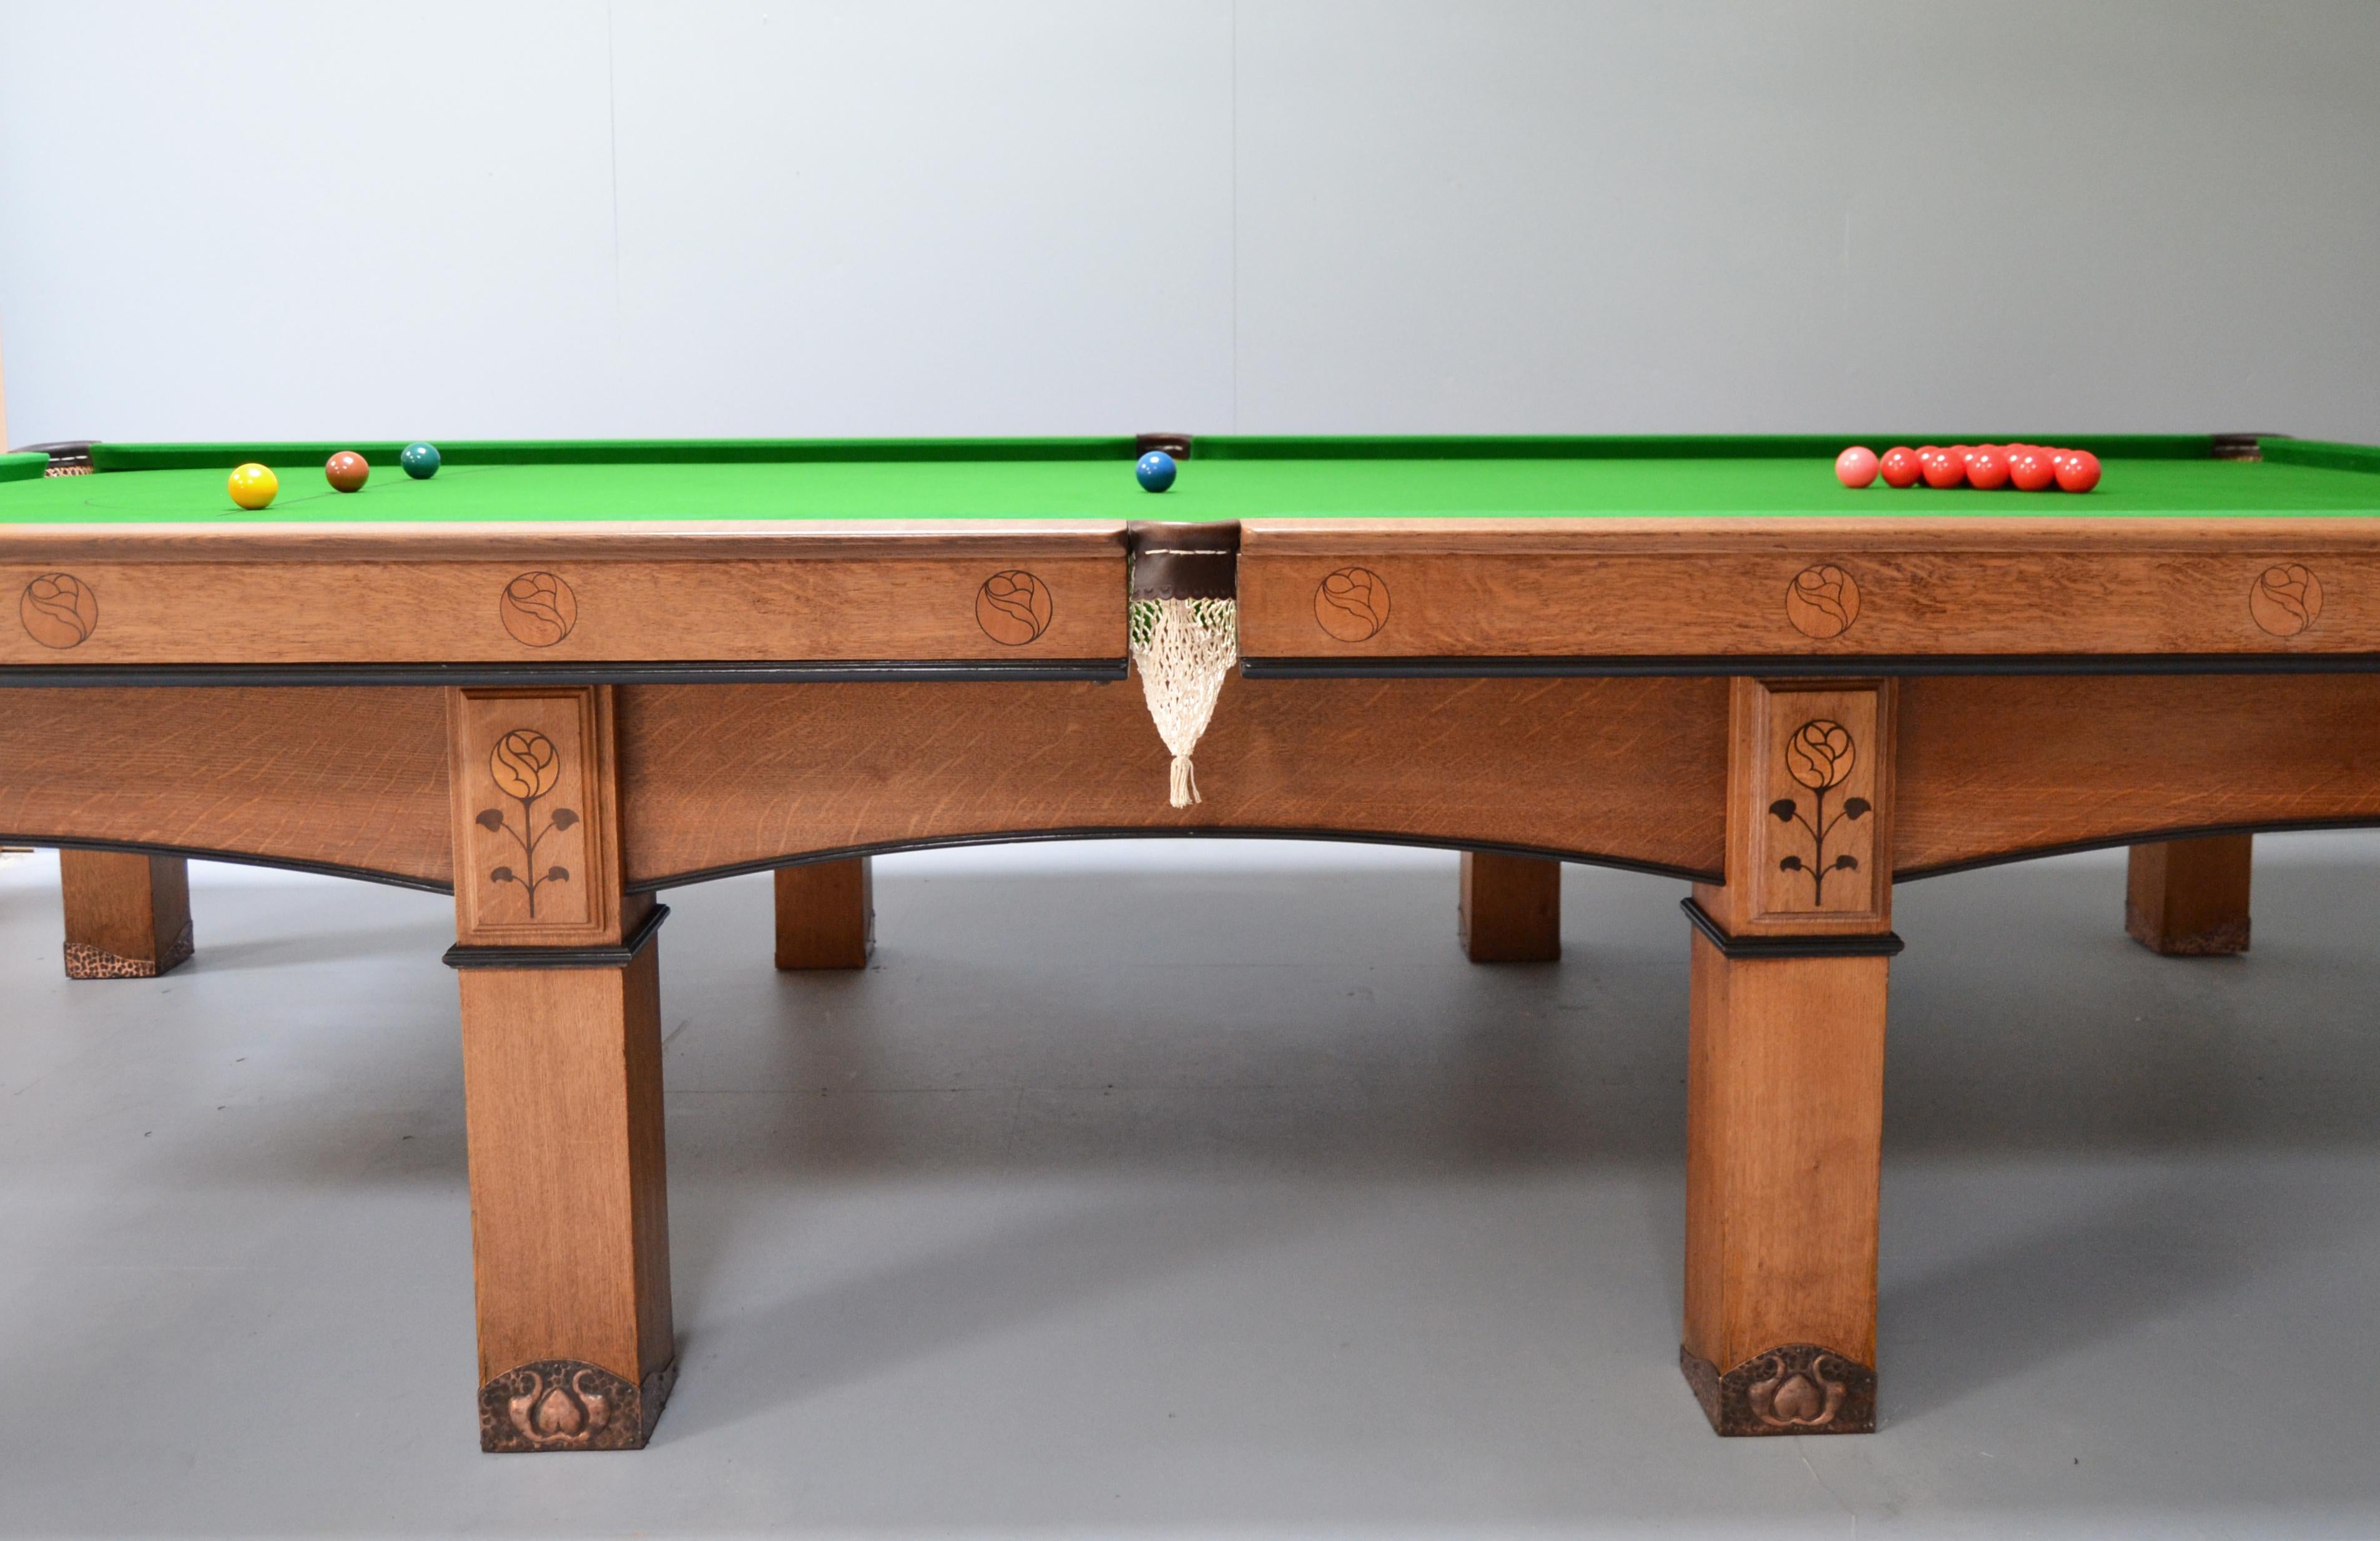 Billiard snooker pool table oak inlaid arts and crafts glasgow school scotland For Sale 6